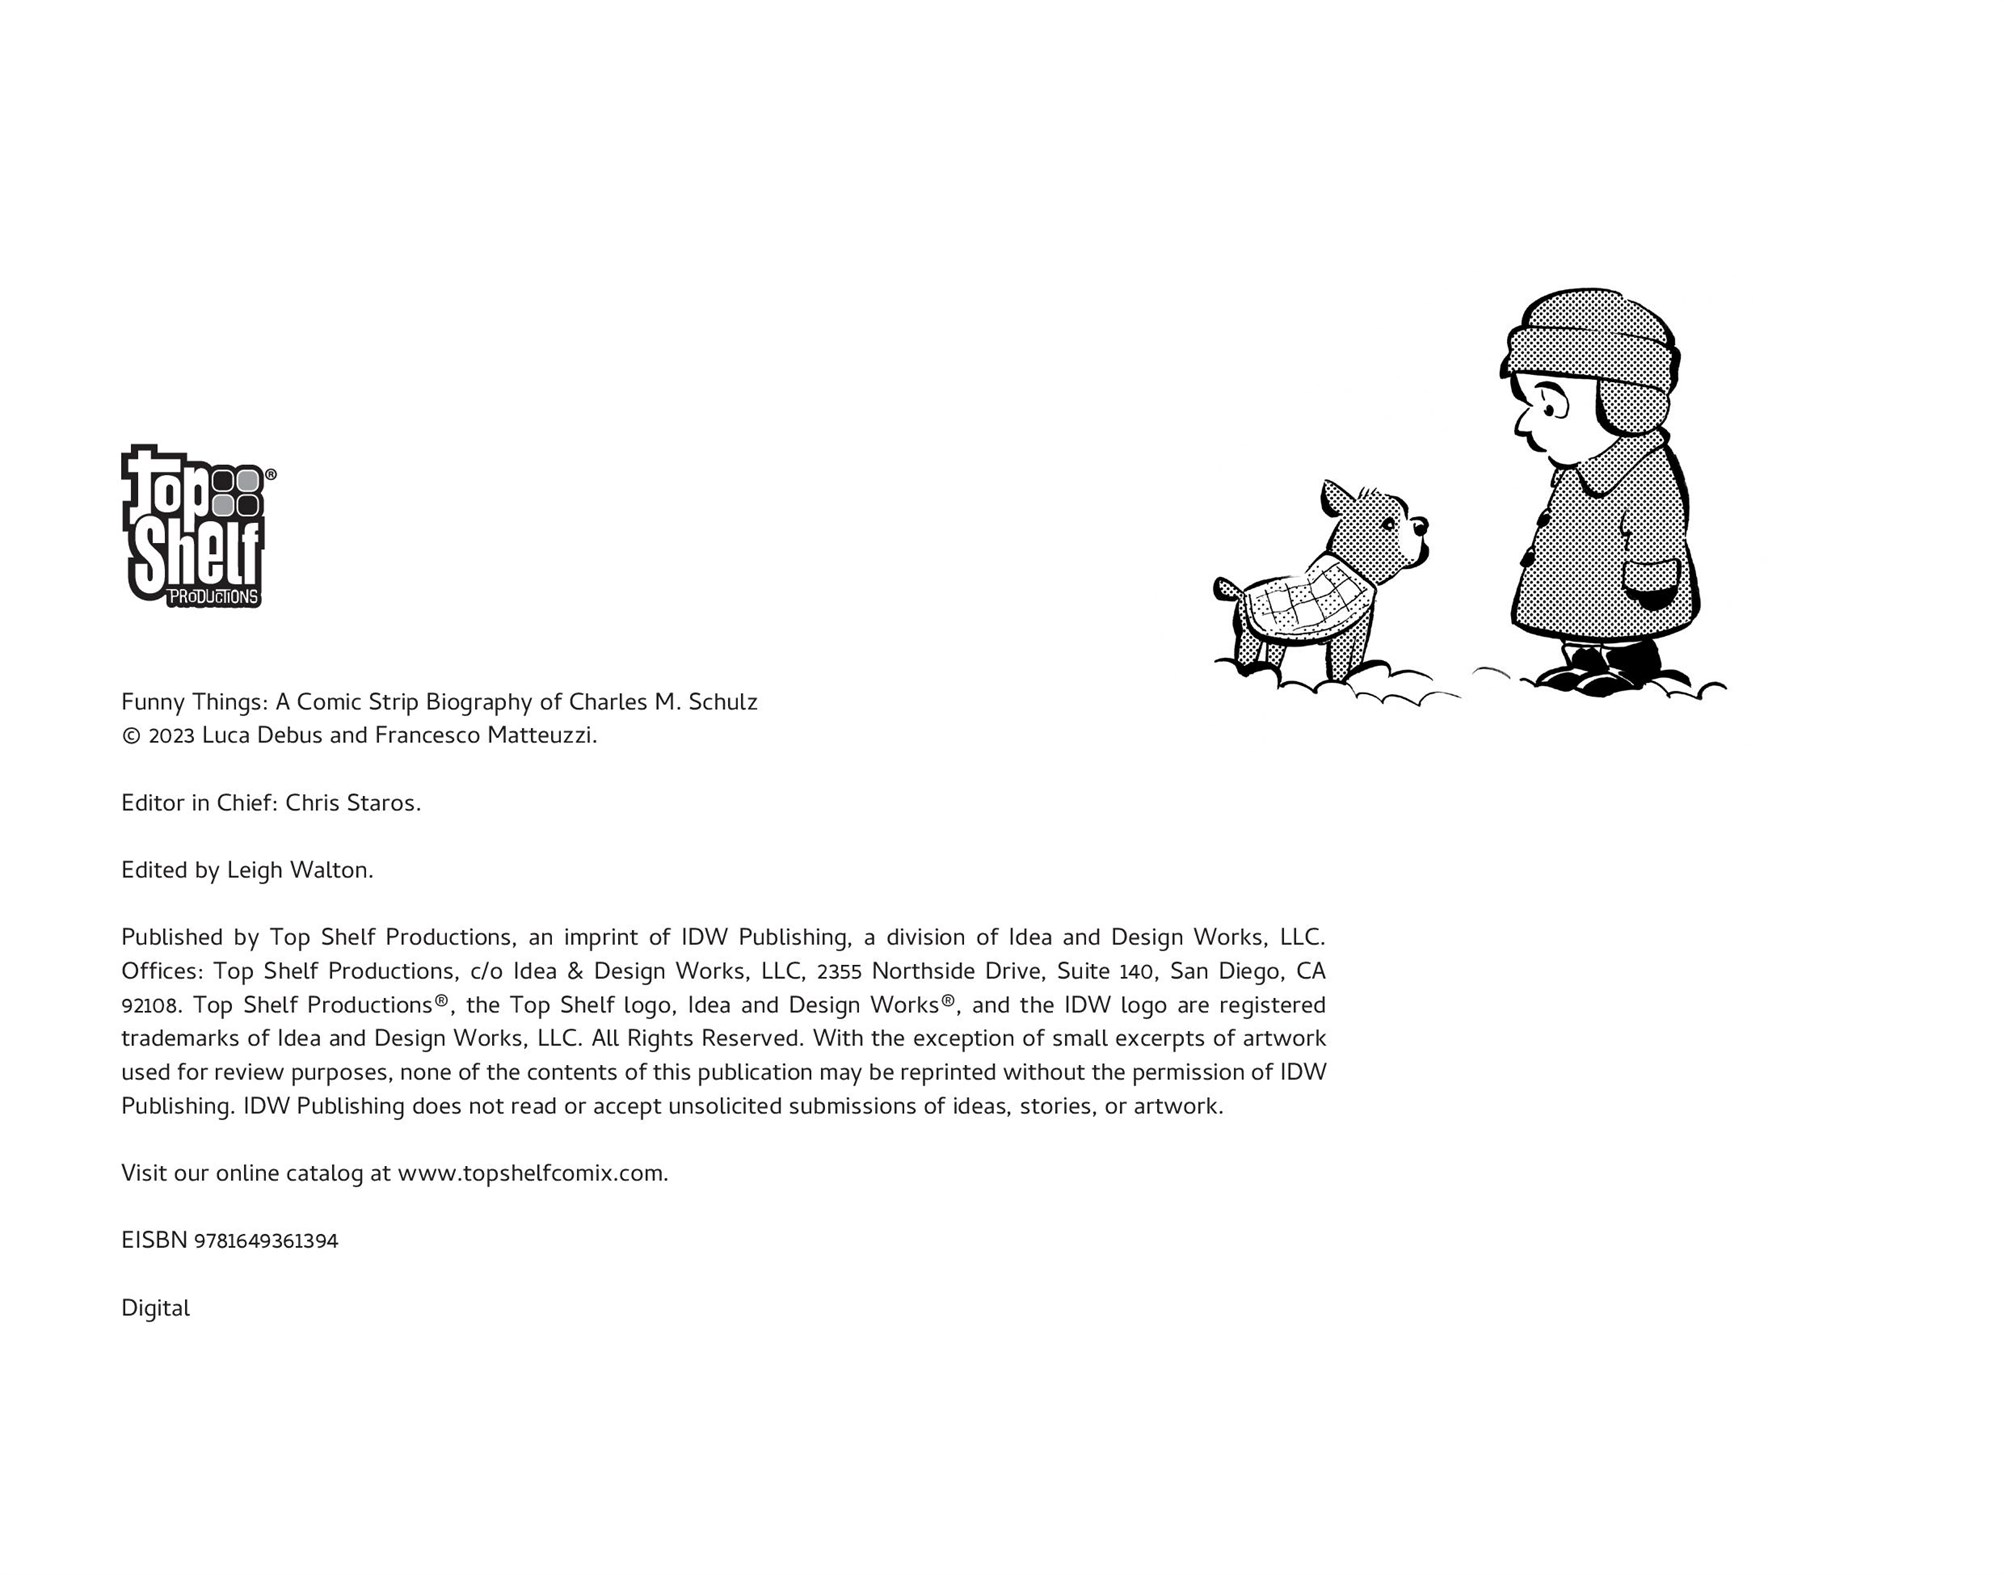 Read online Funny Things: A Comic Strip Biography of Charles M. Schulz comic -  Issue # TPB (Part 1) - 7